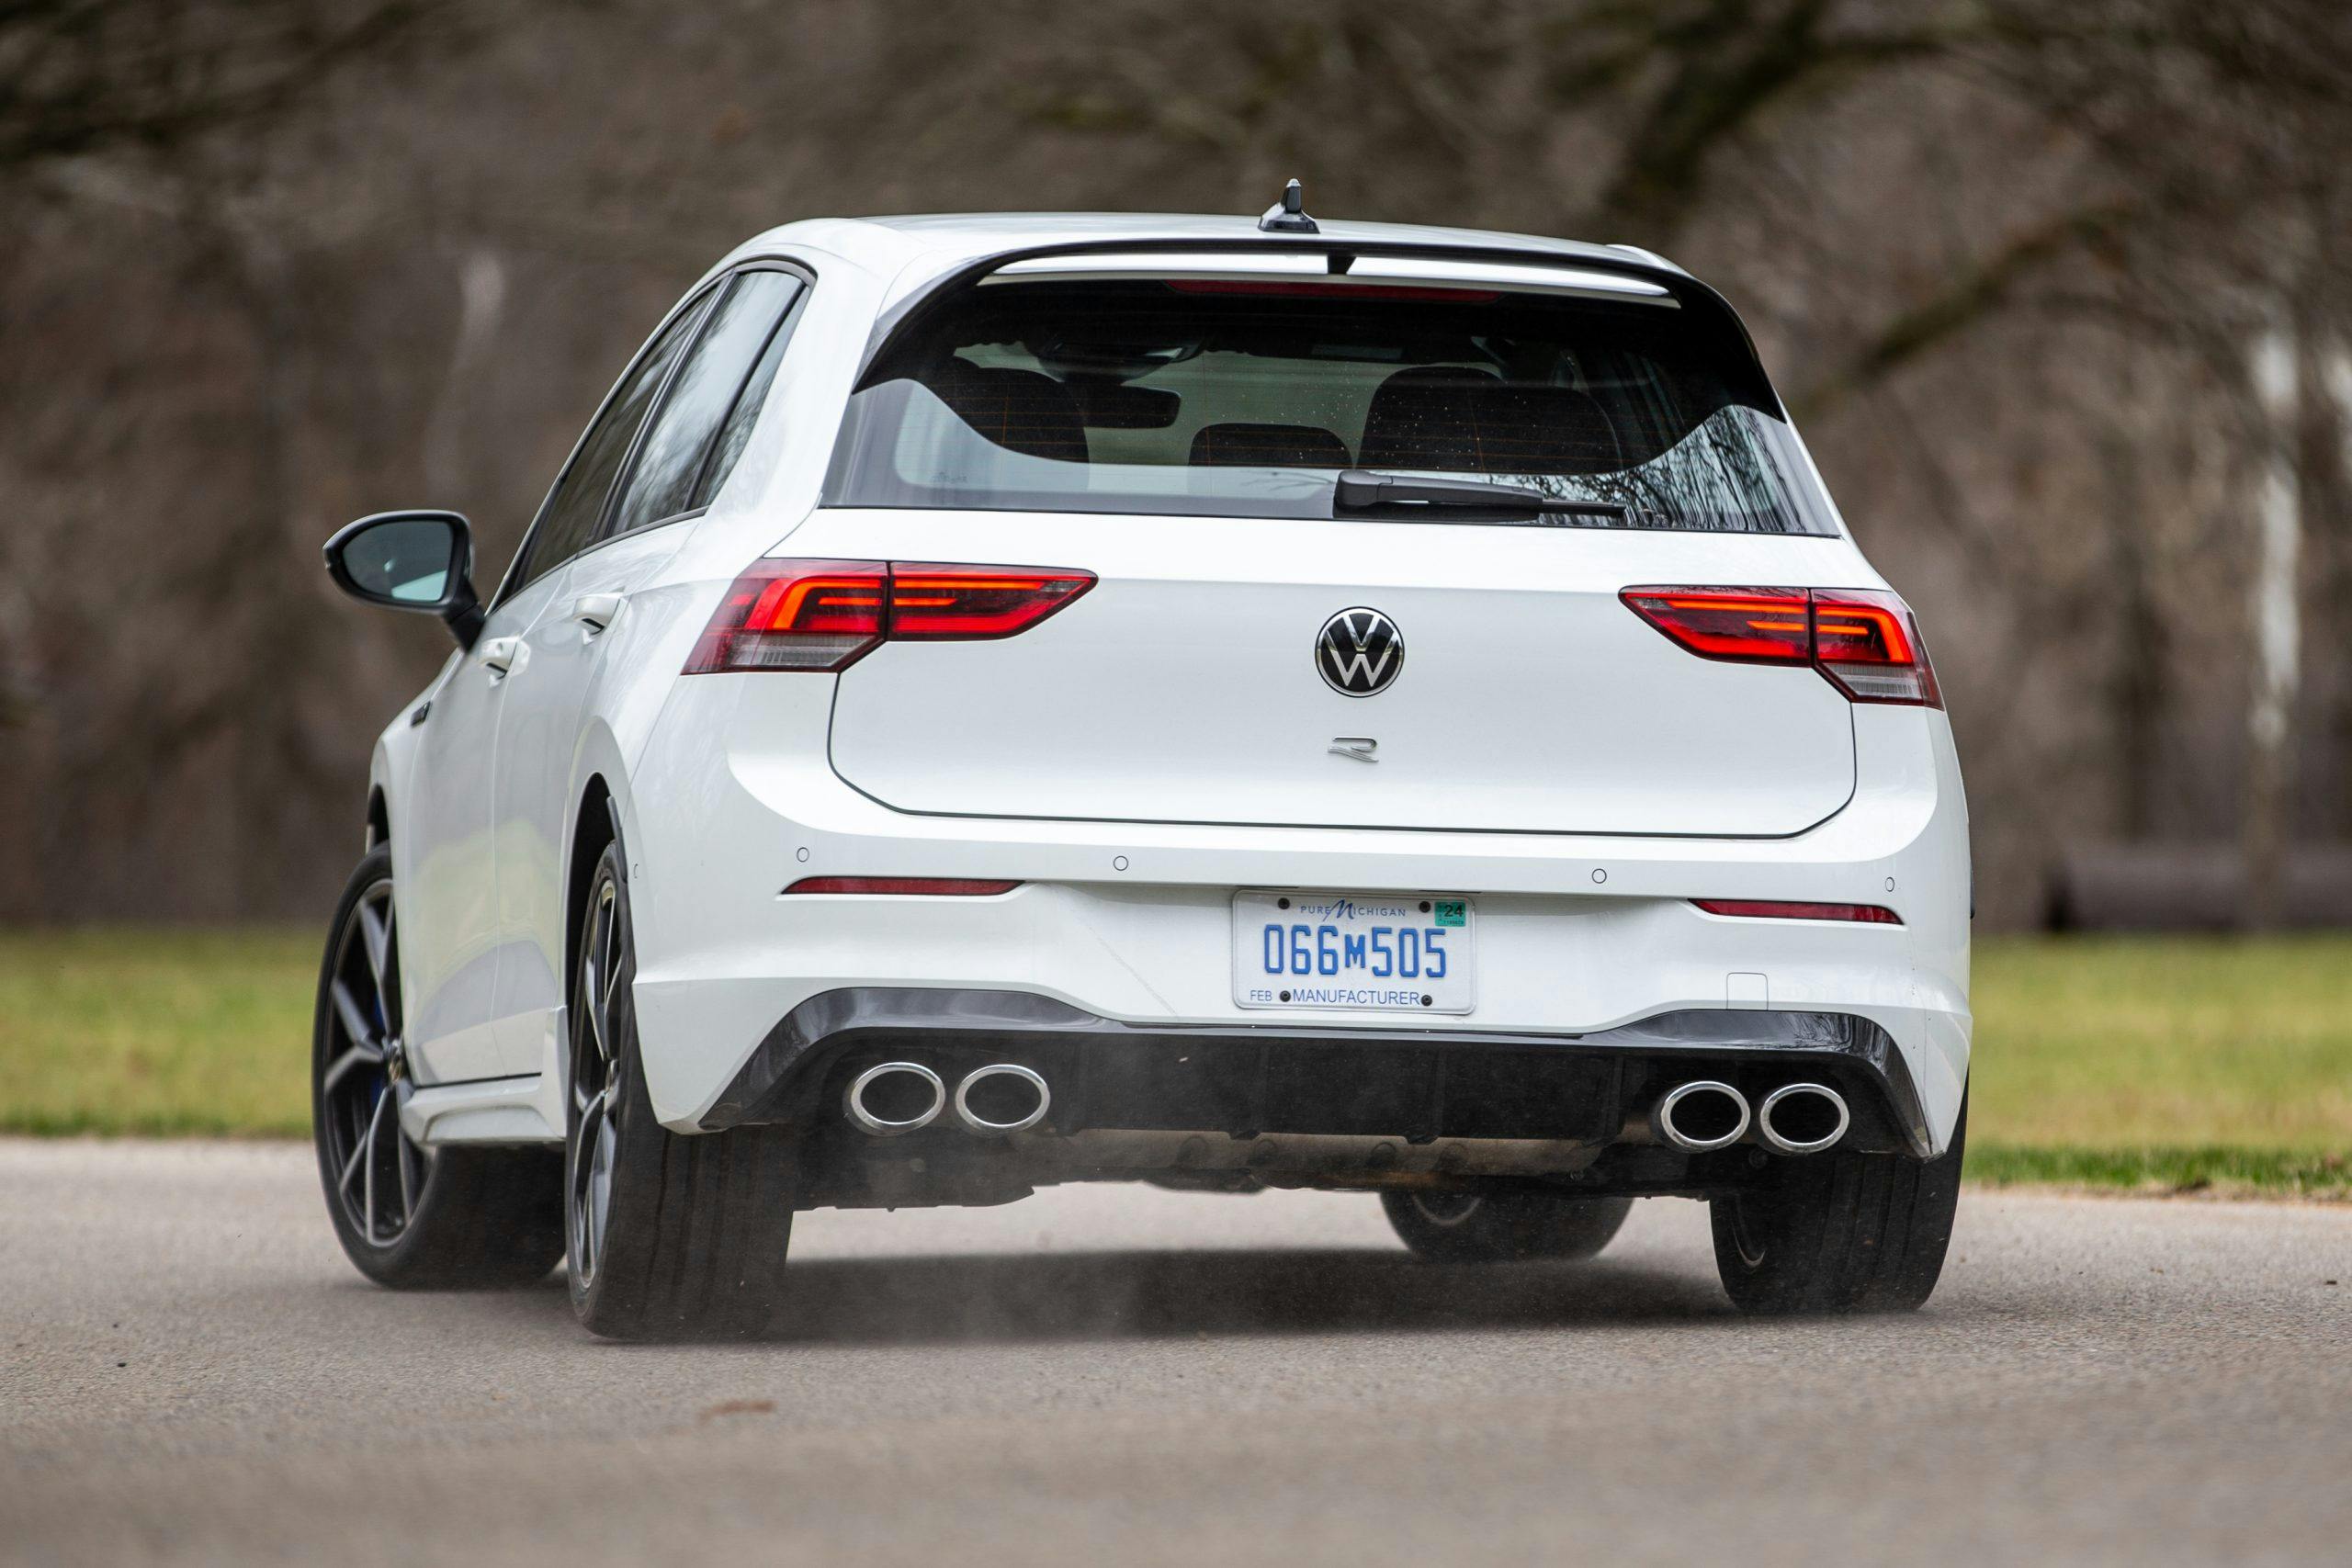 VW Golf R rear driving action